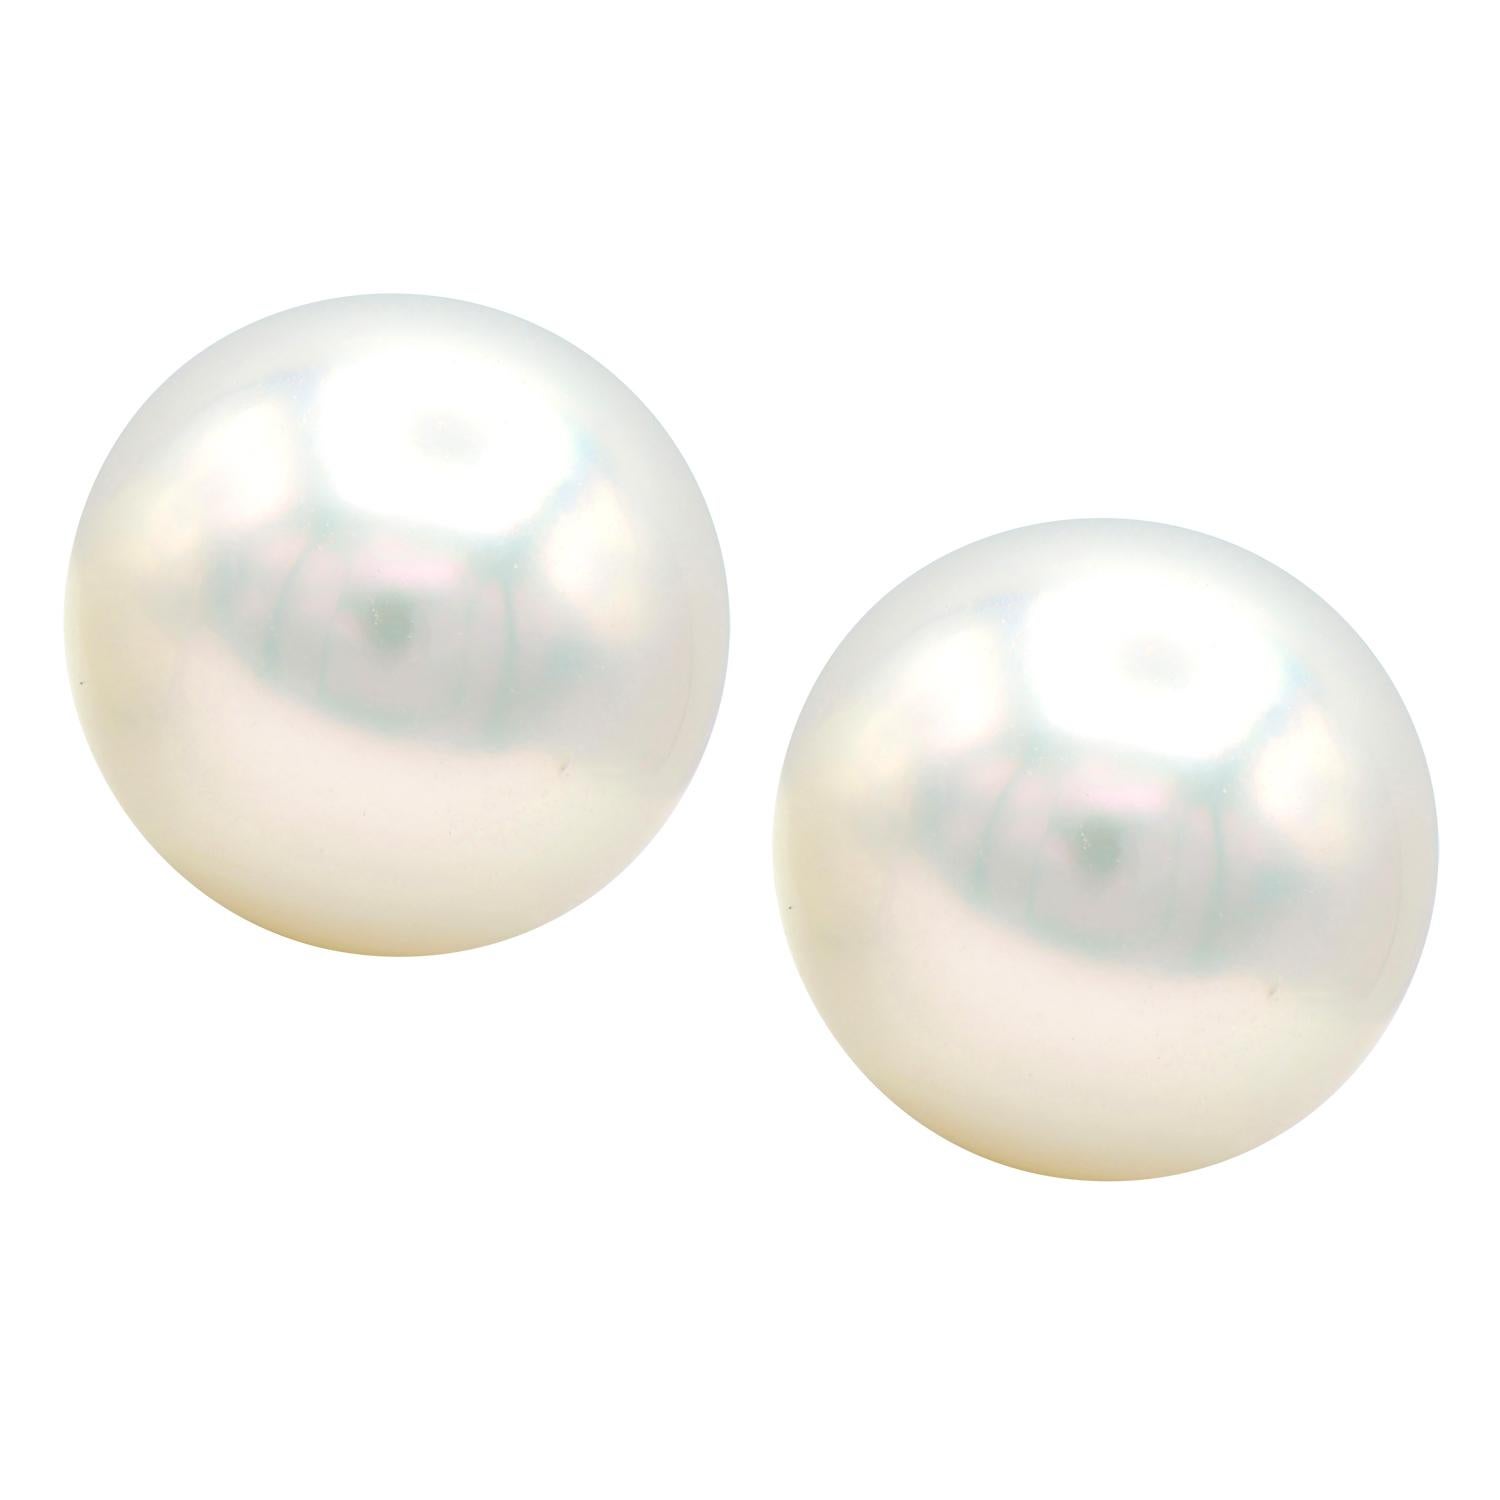 Contemporary 10-10.5mm South Sea Pearl Stud Earrings with 14 Karat White Gold Post and Backs